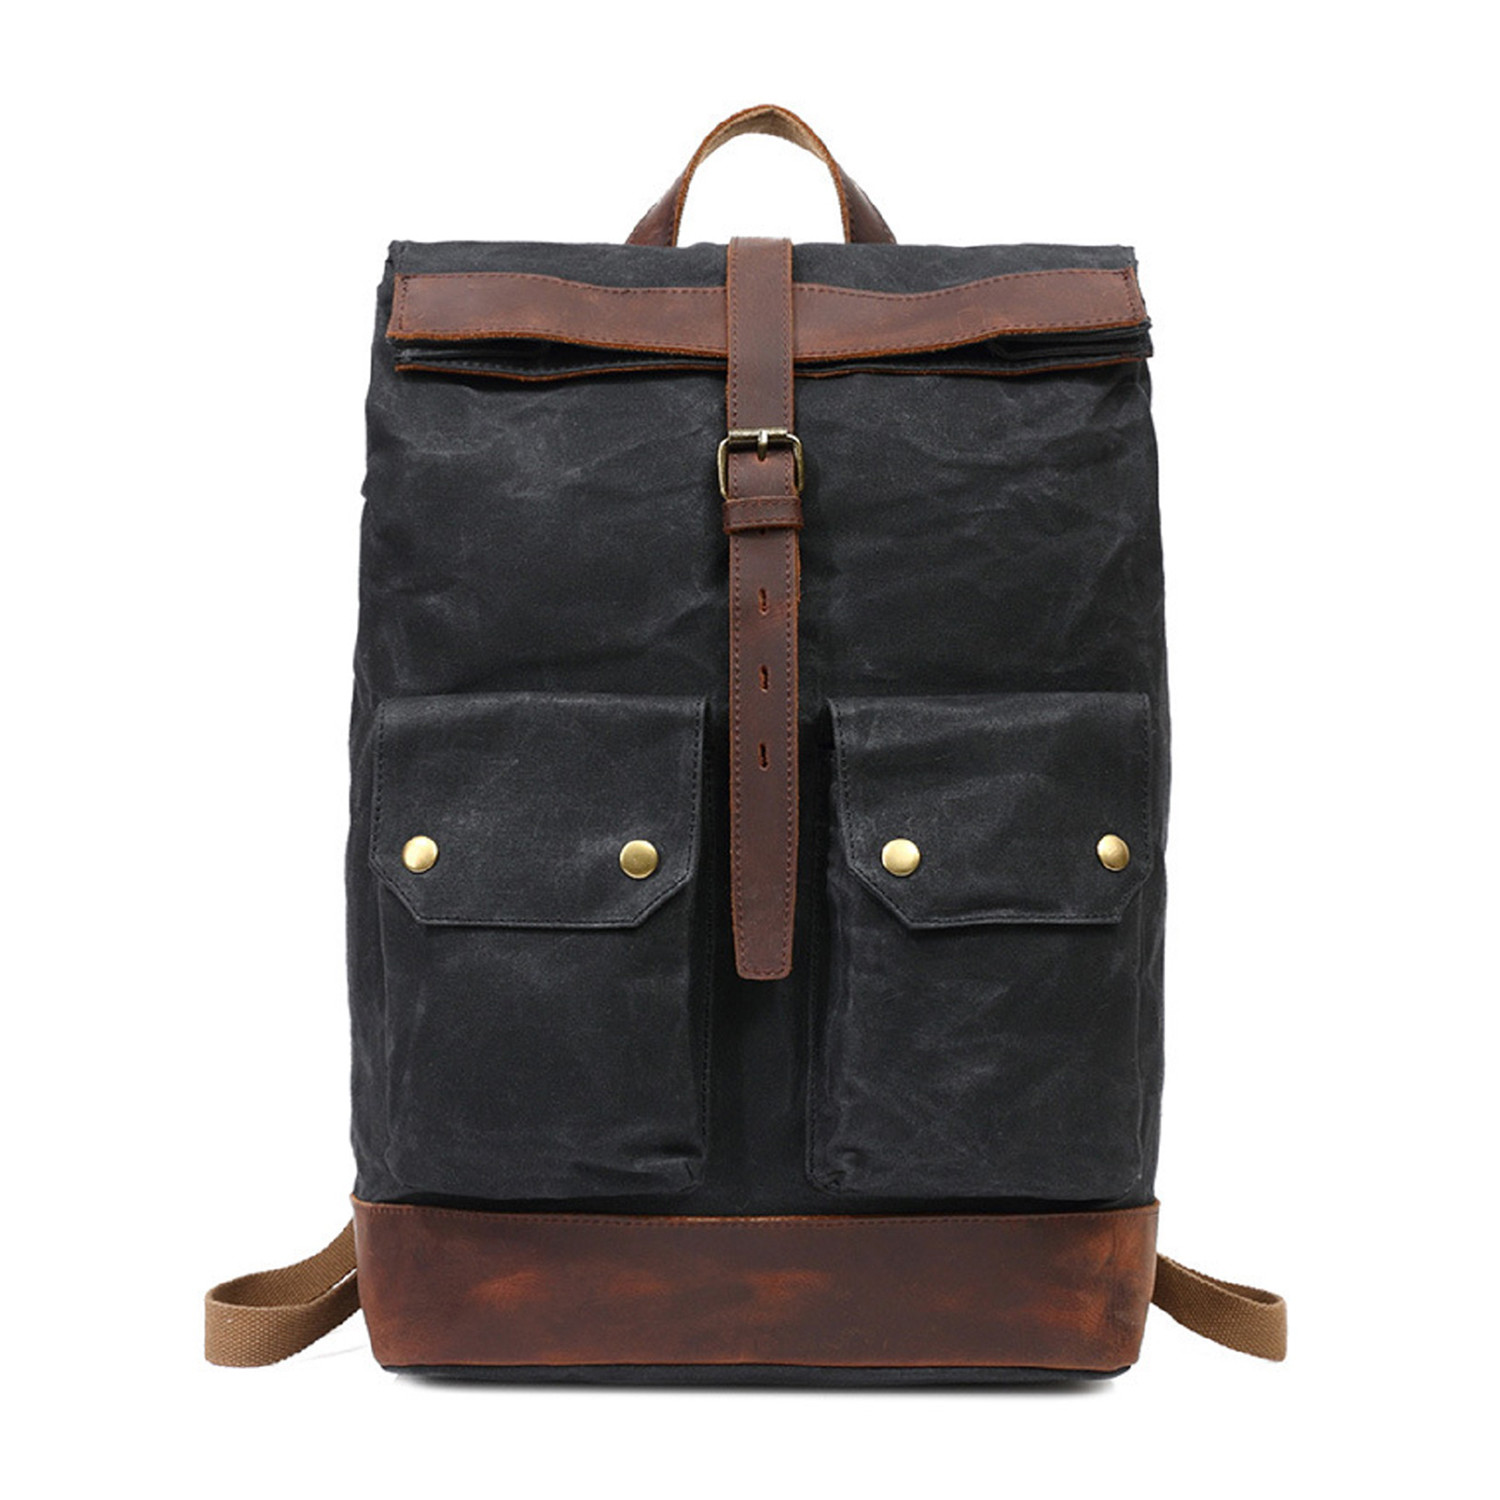 Single Buckle Backpack // Black - OwnBag - Touch of Modern